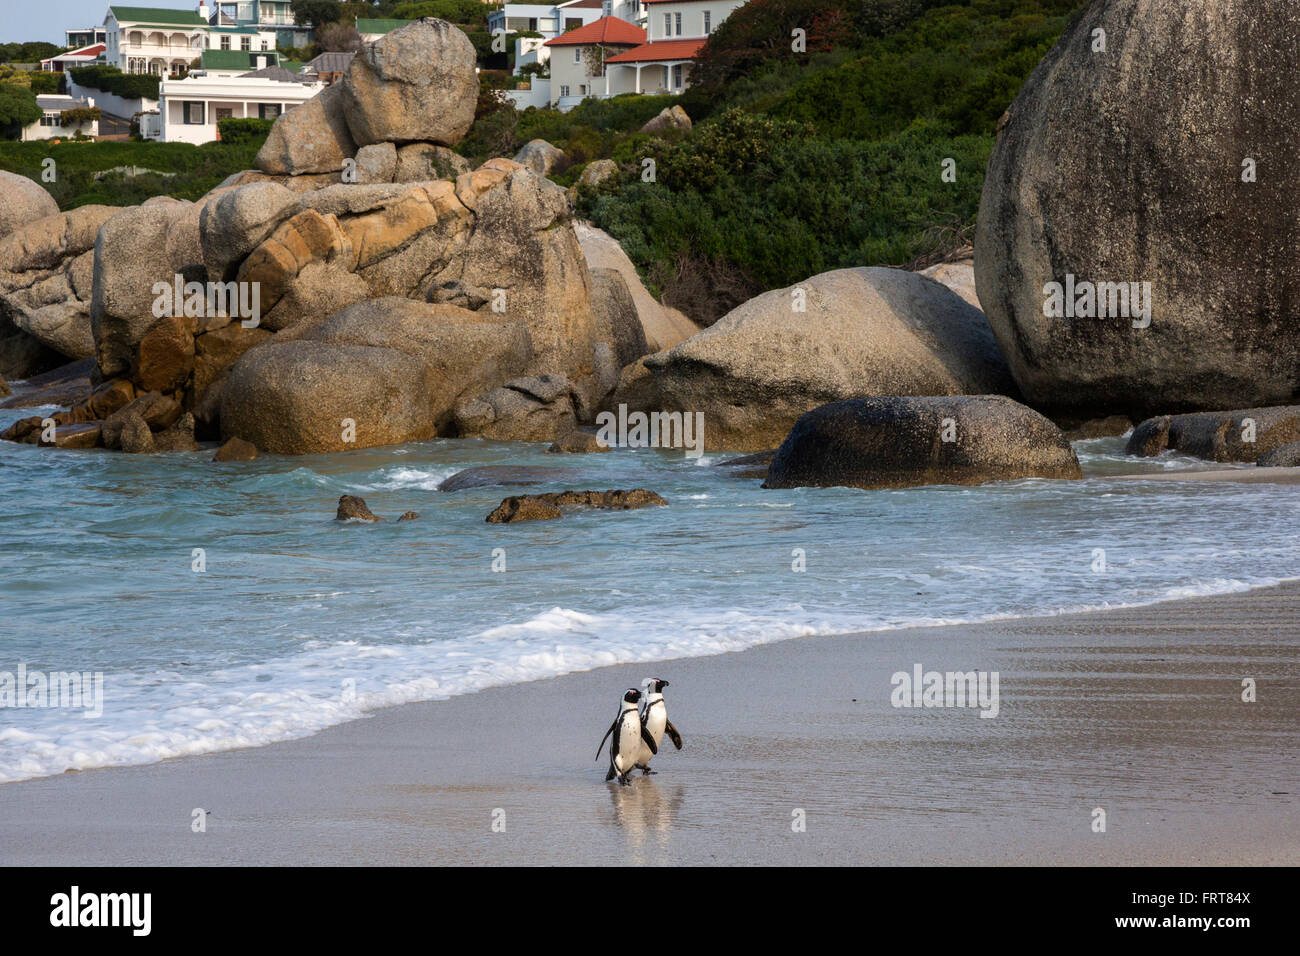 I Penguins africani (Spheniscus demersus) tornando a Colonia, Foxy Beach, Table Mountain National Park, Simon's Town, Sud Africa Foto Stock